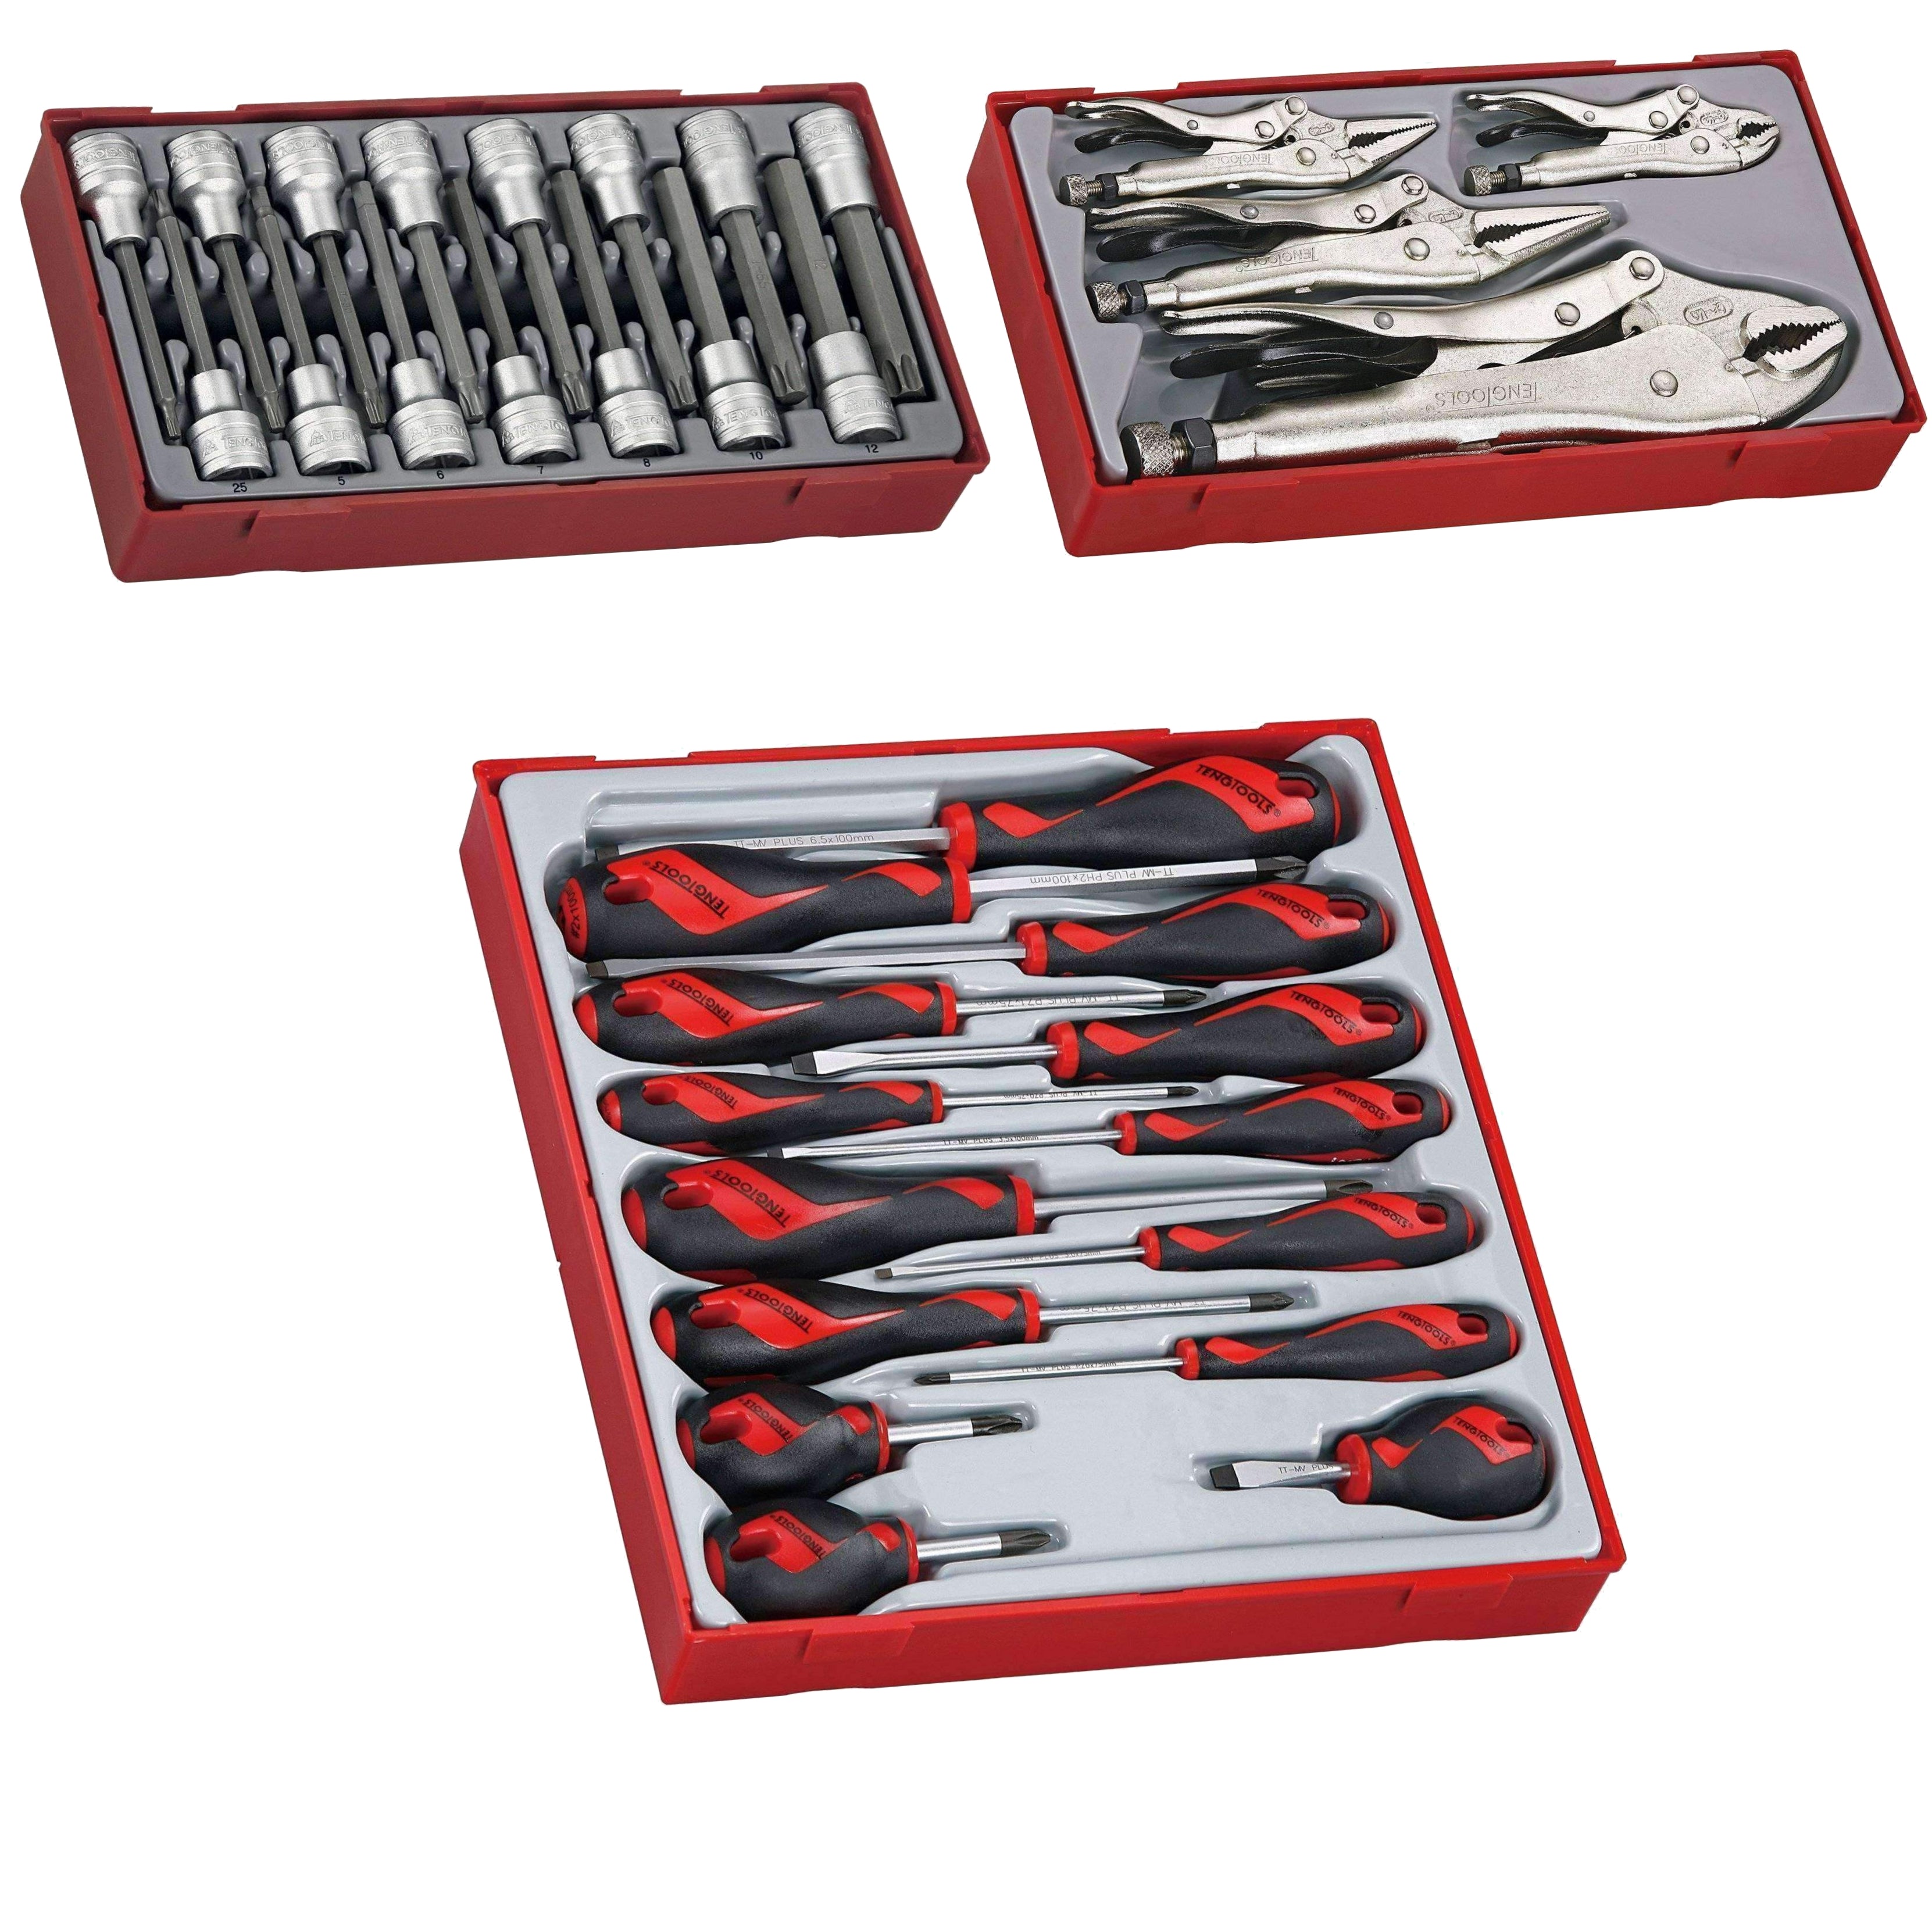 Teng Tools 173 Piece Complete Mixed Service Tool Kit